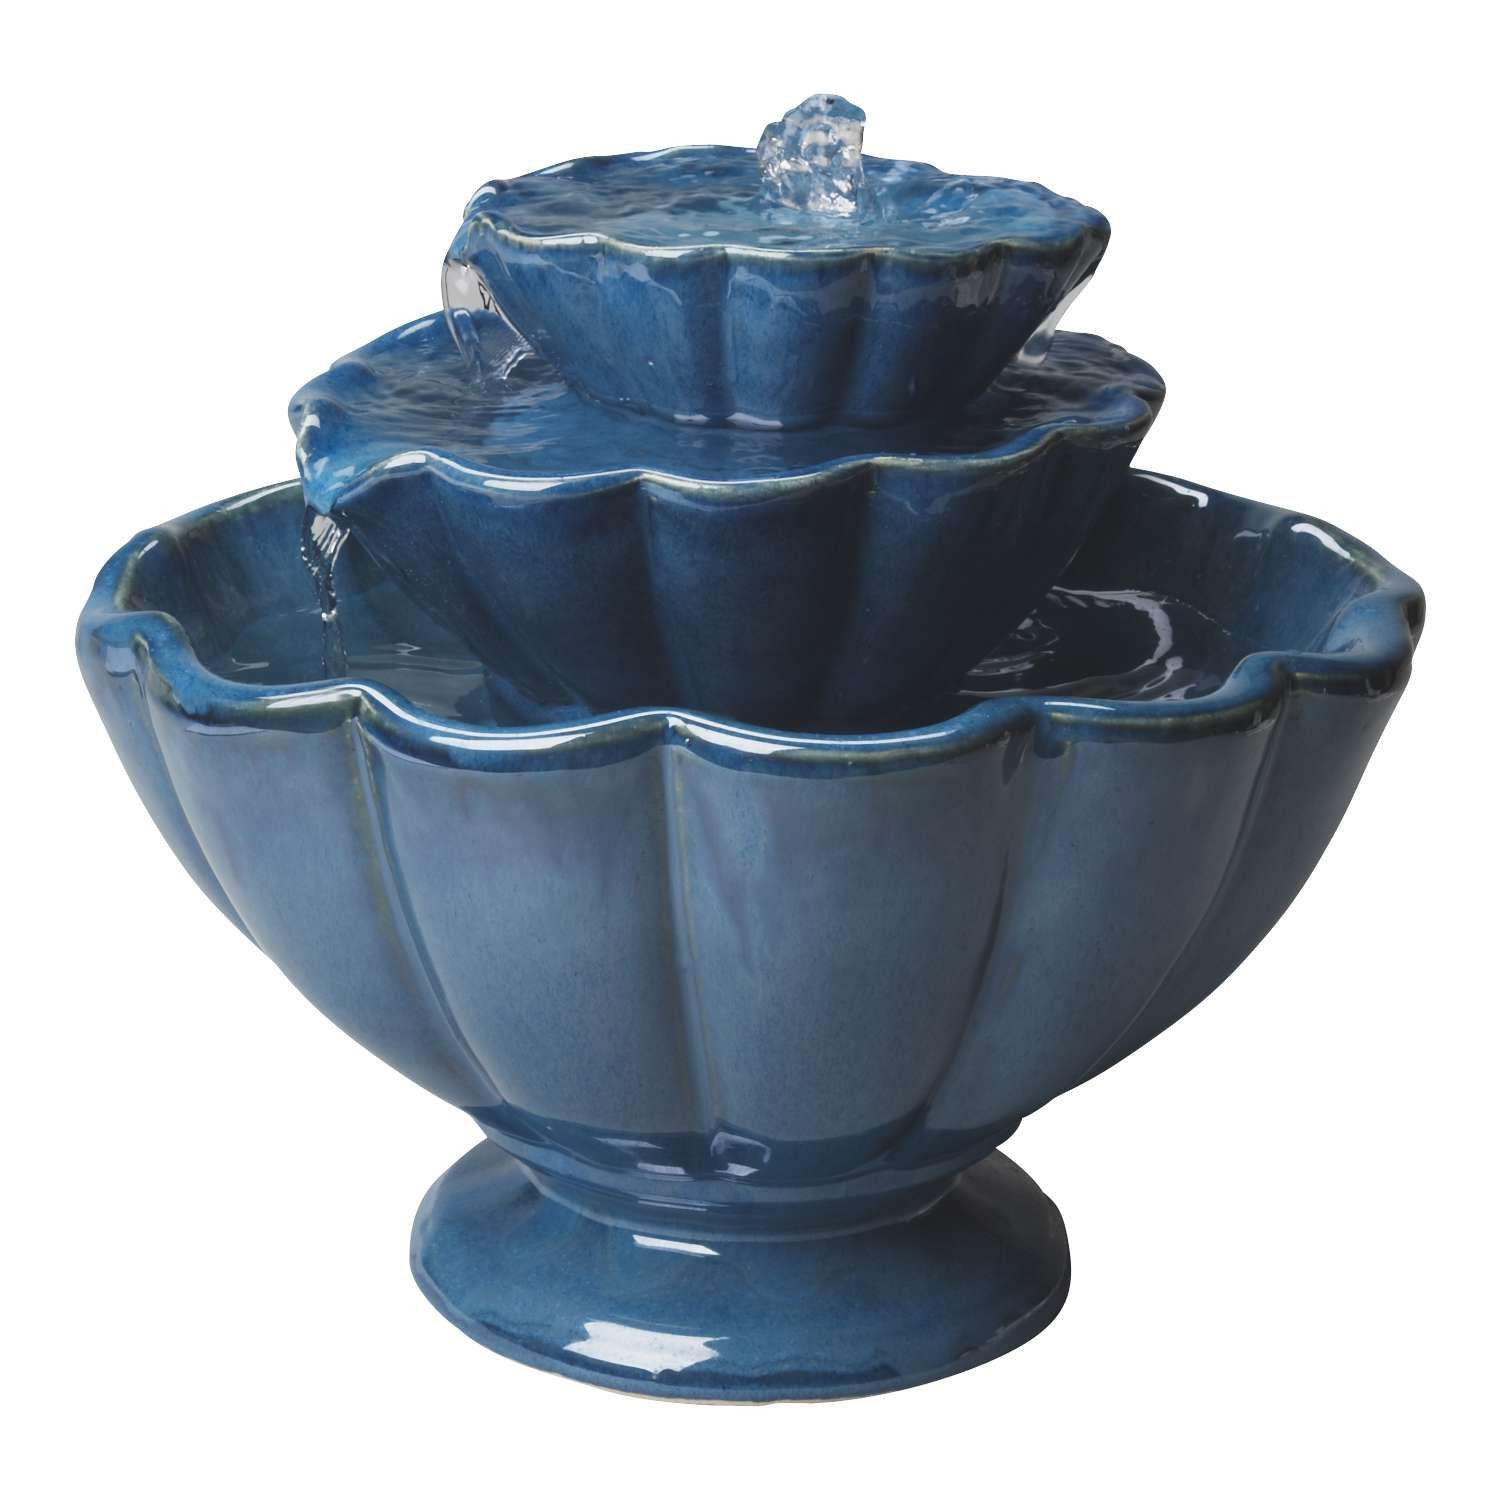 21 Perfect Outdoor Water Feature Vase 2024 free download outdoor water feature vase of bubbling waters bring a tranquil presence to patio or garden blue in bubbling waters bring a tranquil presence to patio or garden blue ceramic scalloped fountai